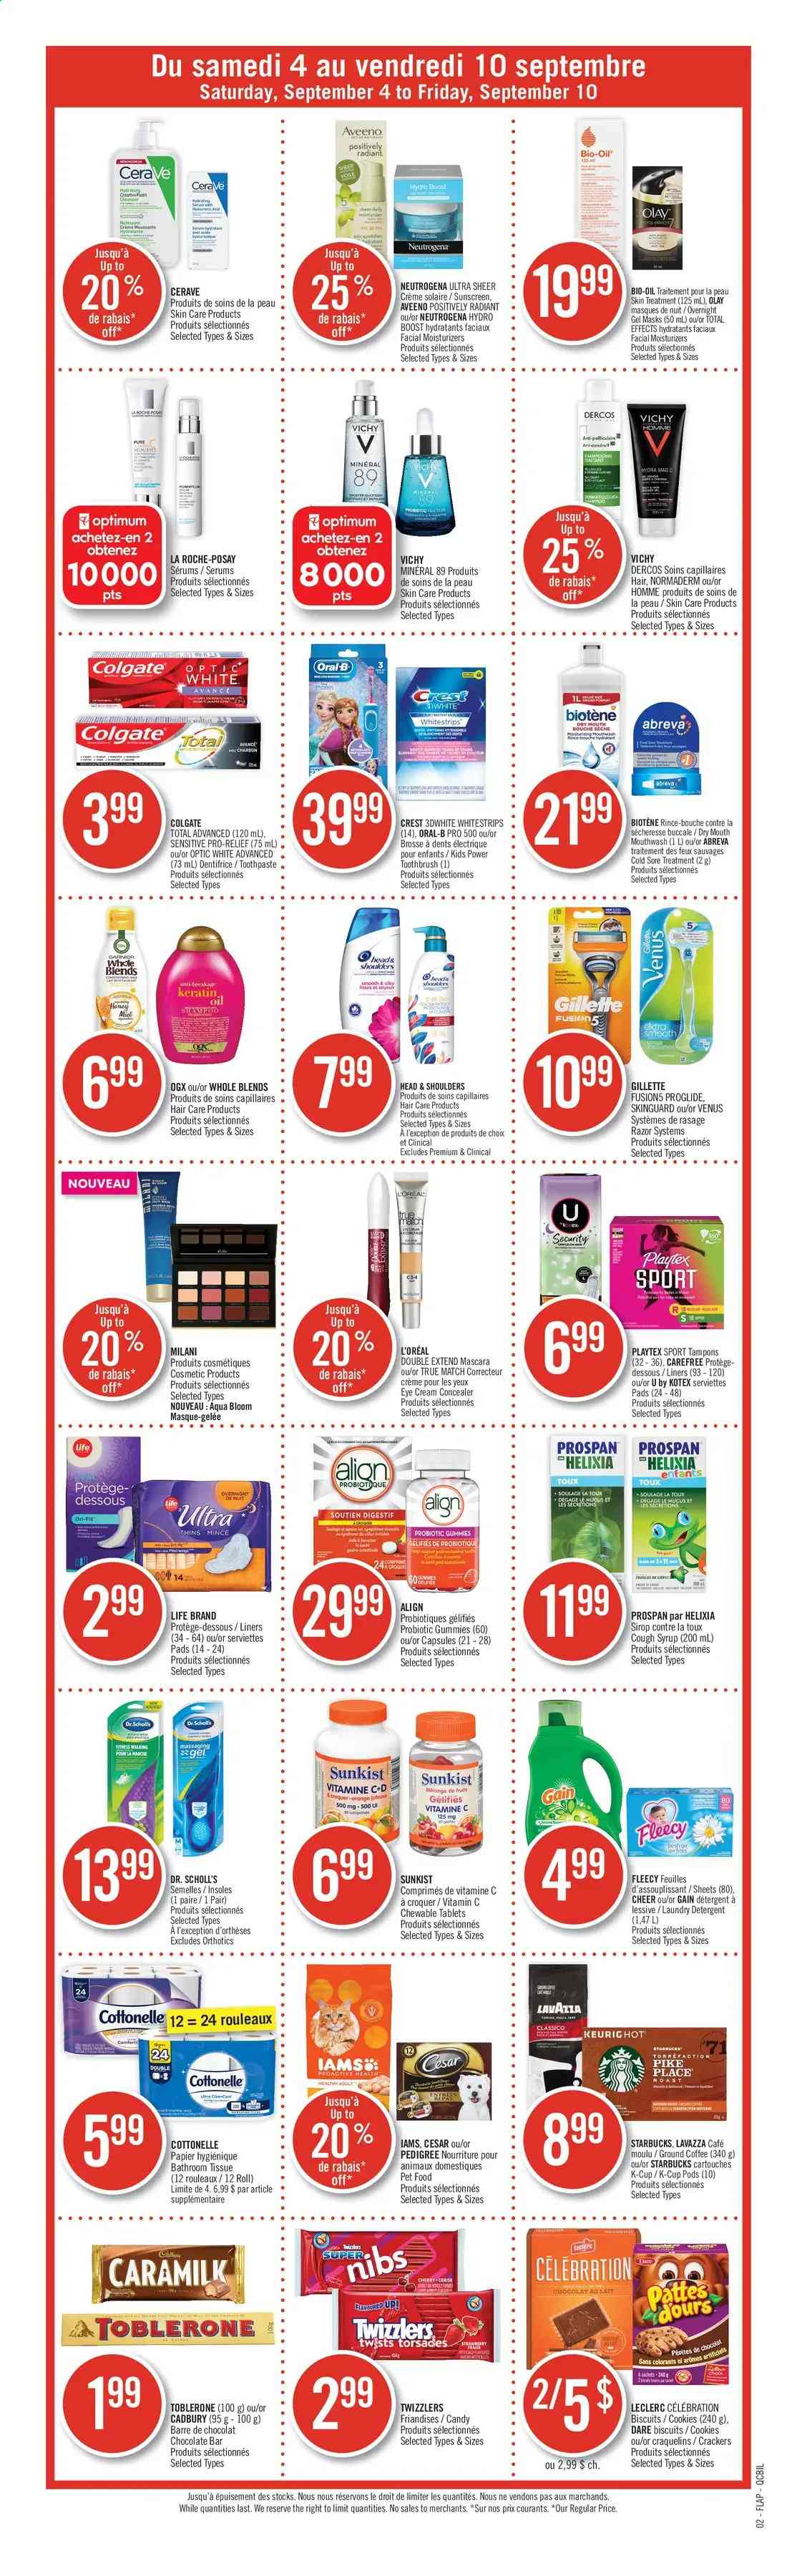 thumbnail - Pharmaprix Flyer - September 04, 2021 - September 10, 2021 - Sales products - cookies, Celebration, crackers, biscuit, Toblerone, Cadbury, chocolate bar, Thins, Classico, oil, syrup, Boost, coffee, ground coffee, coffee capsules, Starbucks, K-Cups, Lavazza, Aveeno, bath tissue, Cottonelle, Gain, laundry detergent, Vichy, Biotene, toothbrush, toothpaste, mouthwash, Crest, Playtex, Carefree, Kotex, tampons, Abreva, CeraVe, L’Oréal, La Roche-Posay, moisturizer, Olay, eye cream, OGX, keratin, razor, Venus, corrector, vitamin c, Dr. Scholl's, detergent, Colgate, Gillette, mascara, Neutrogena, Head & Shoulders, Oral-B, oranges. Page 16.